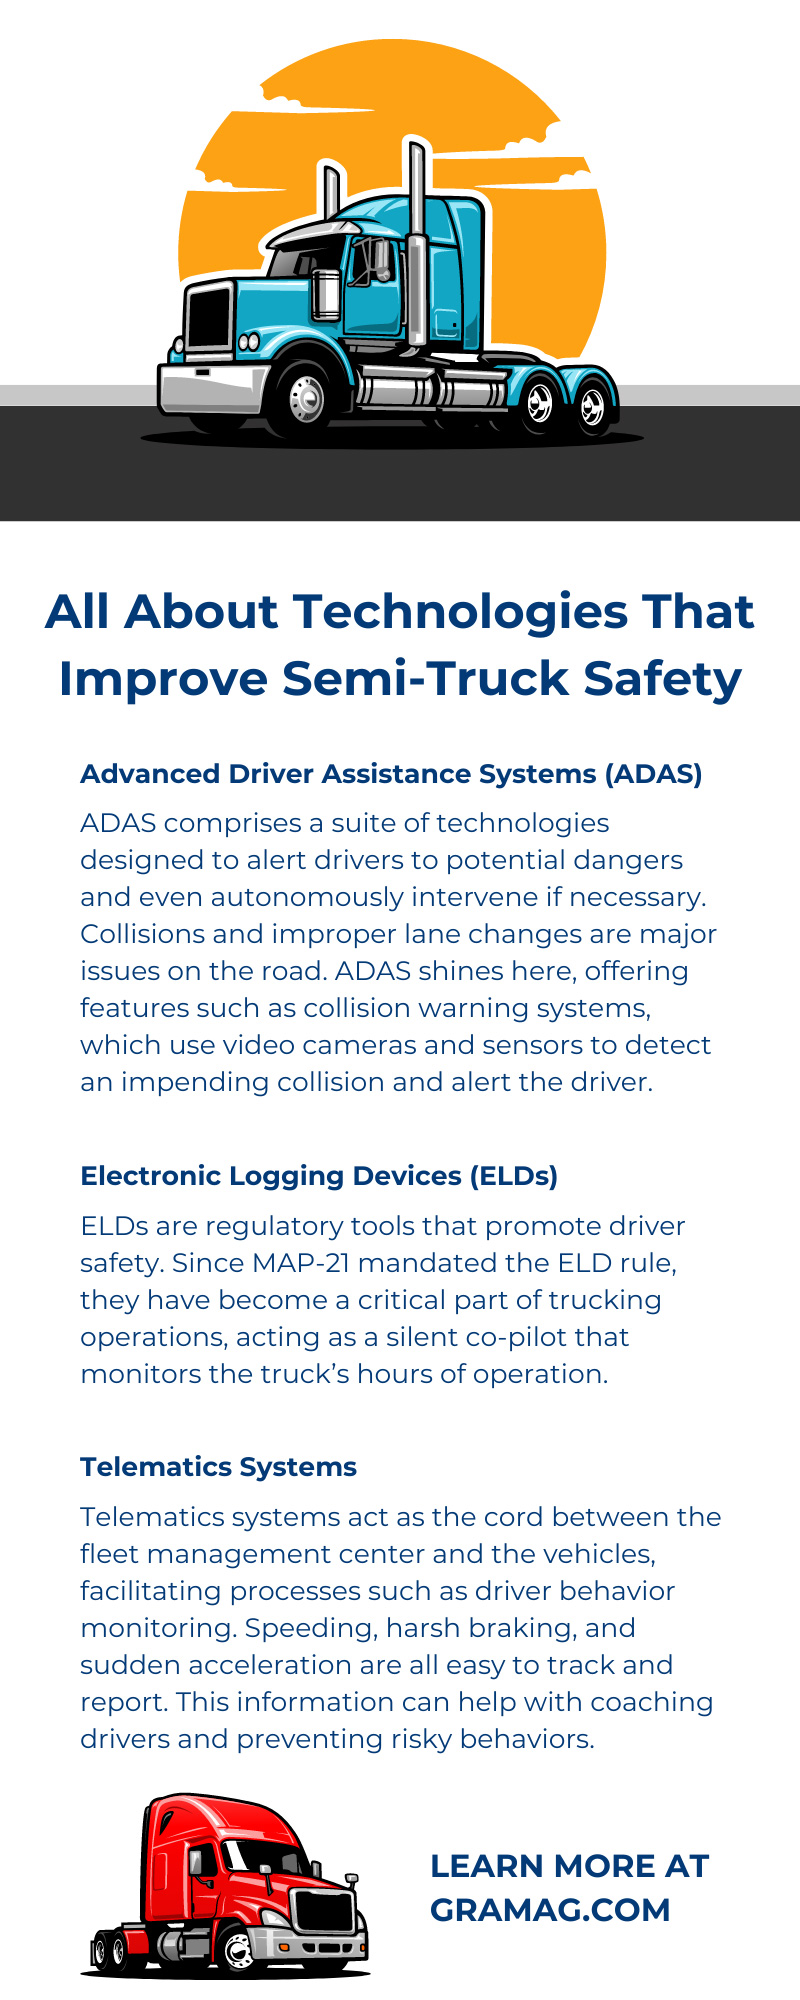 All About Technologies That Improve Semi-Truck Safety